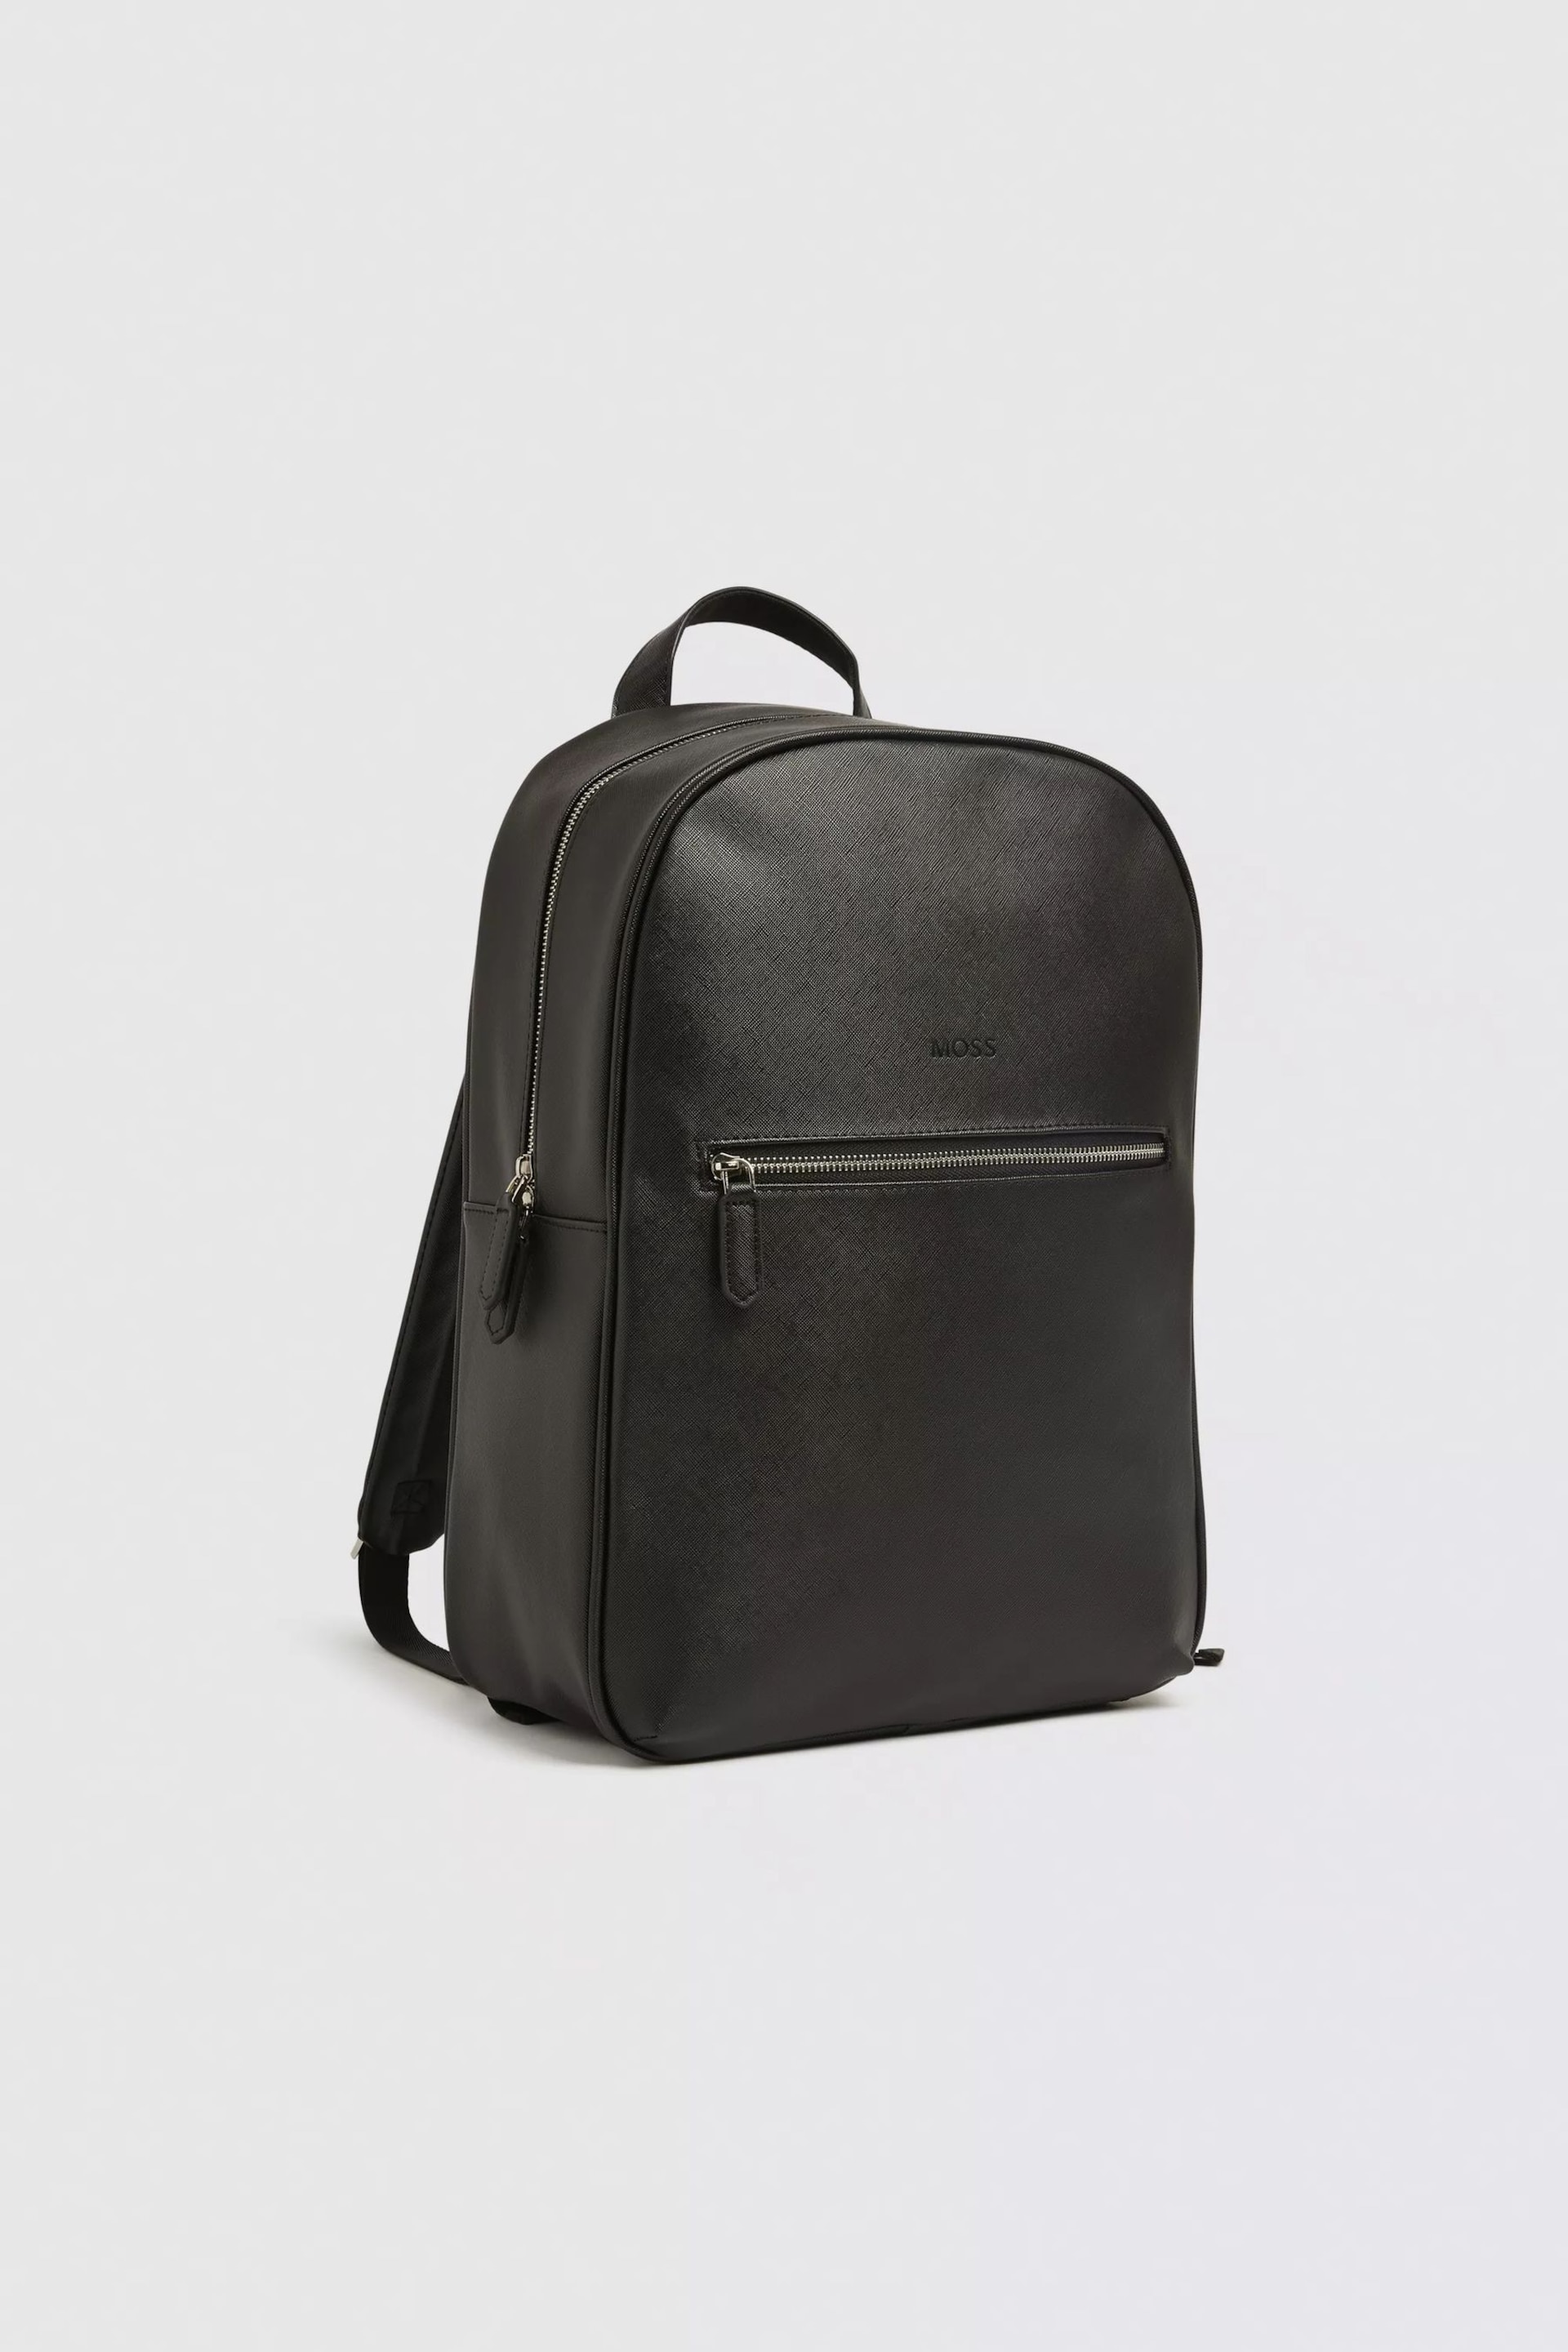 MOSS Black Saffiano Backpack - Image 2 of 4